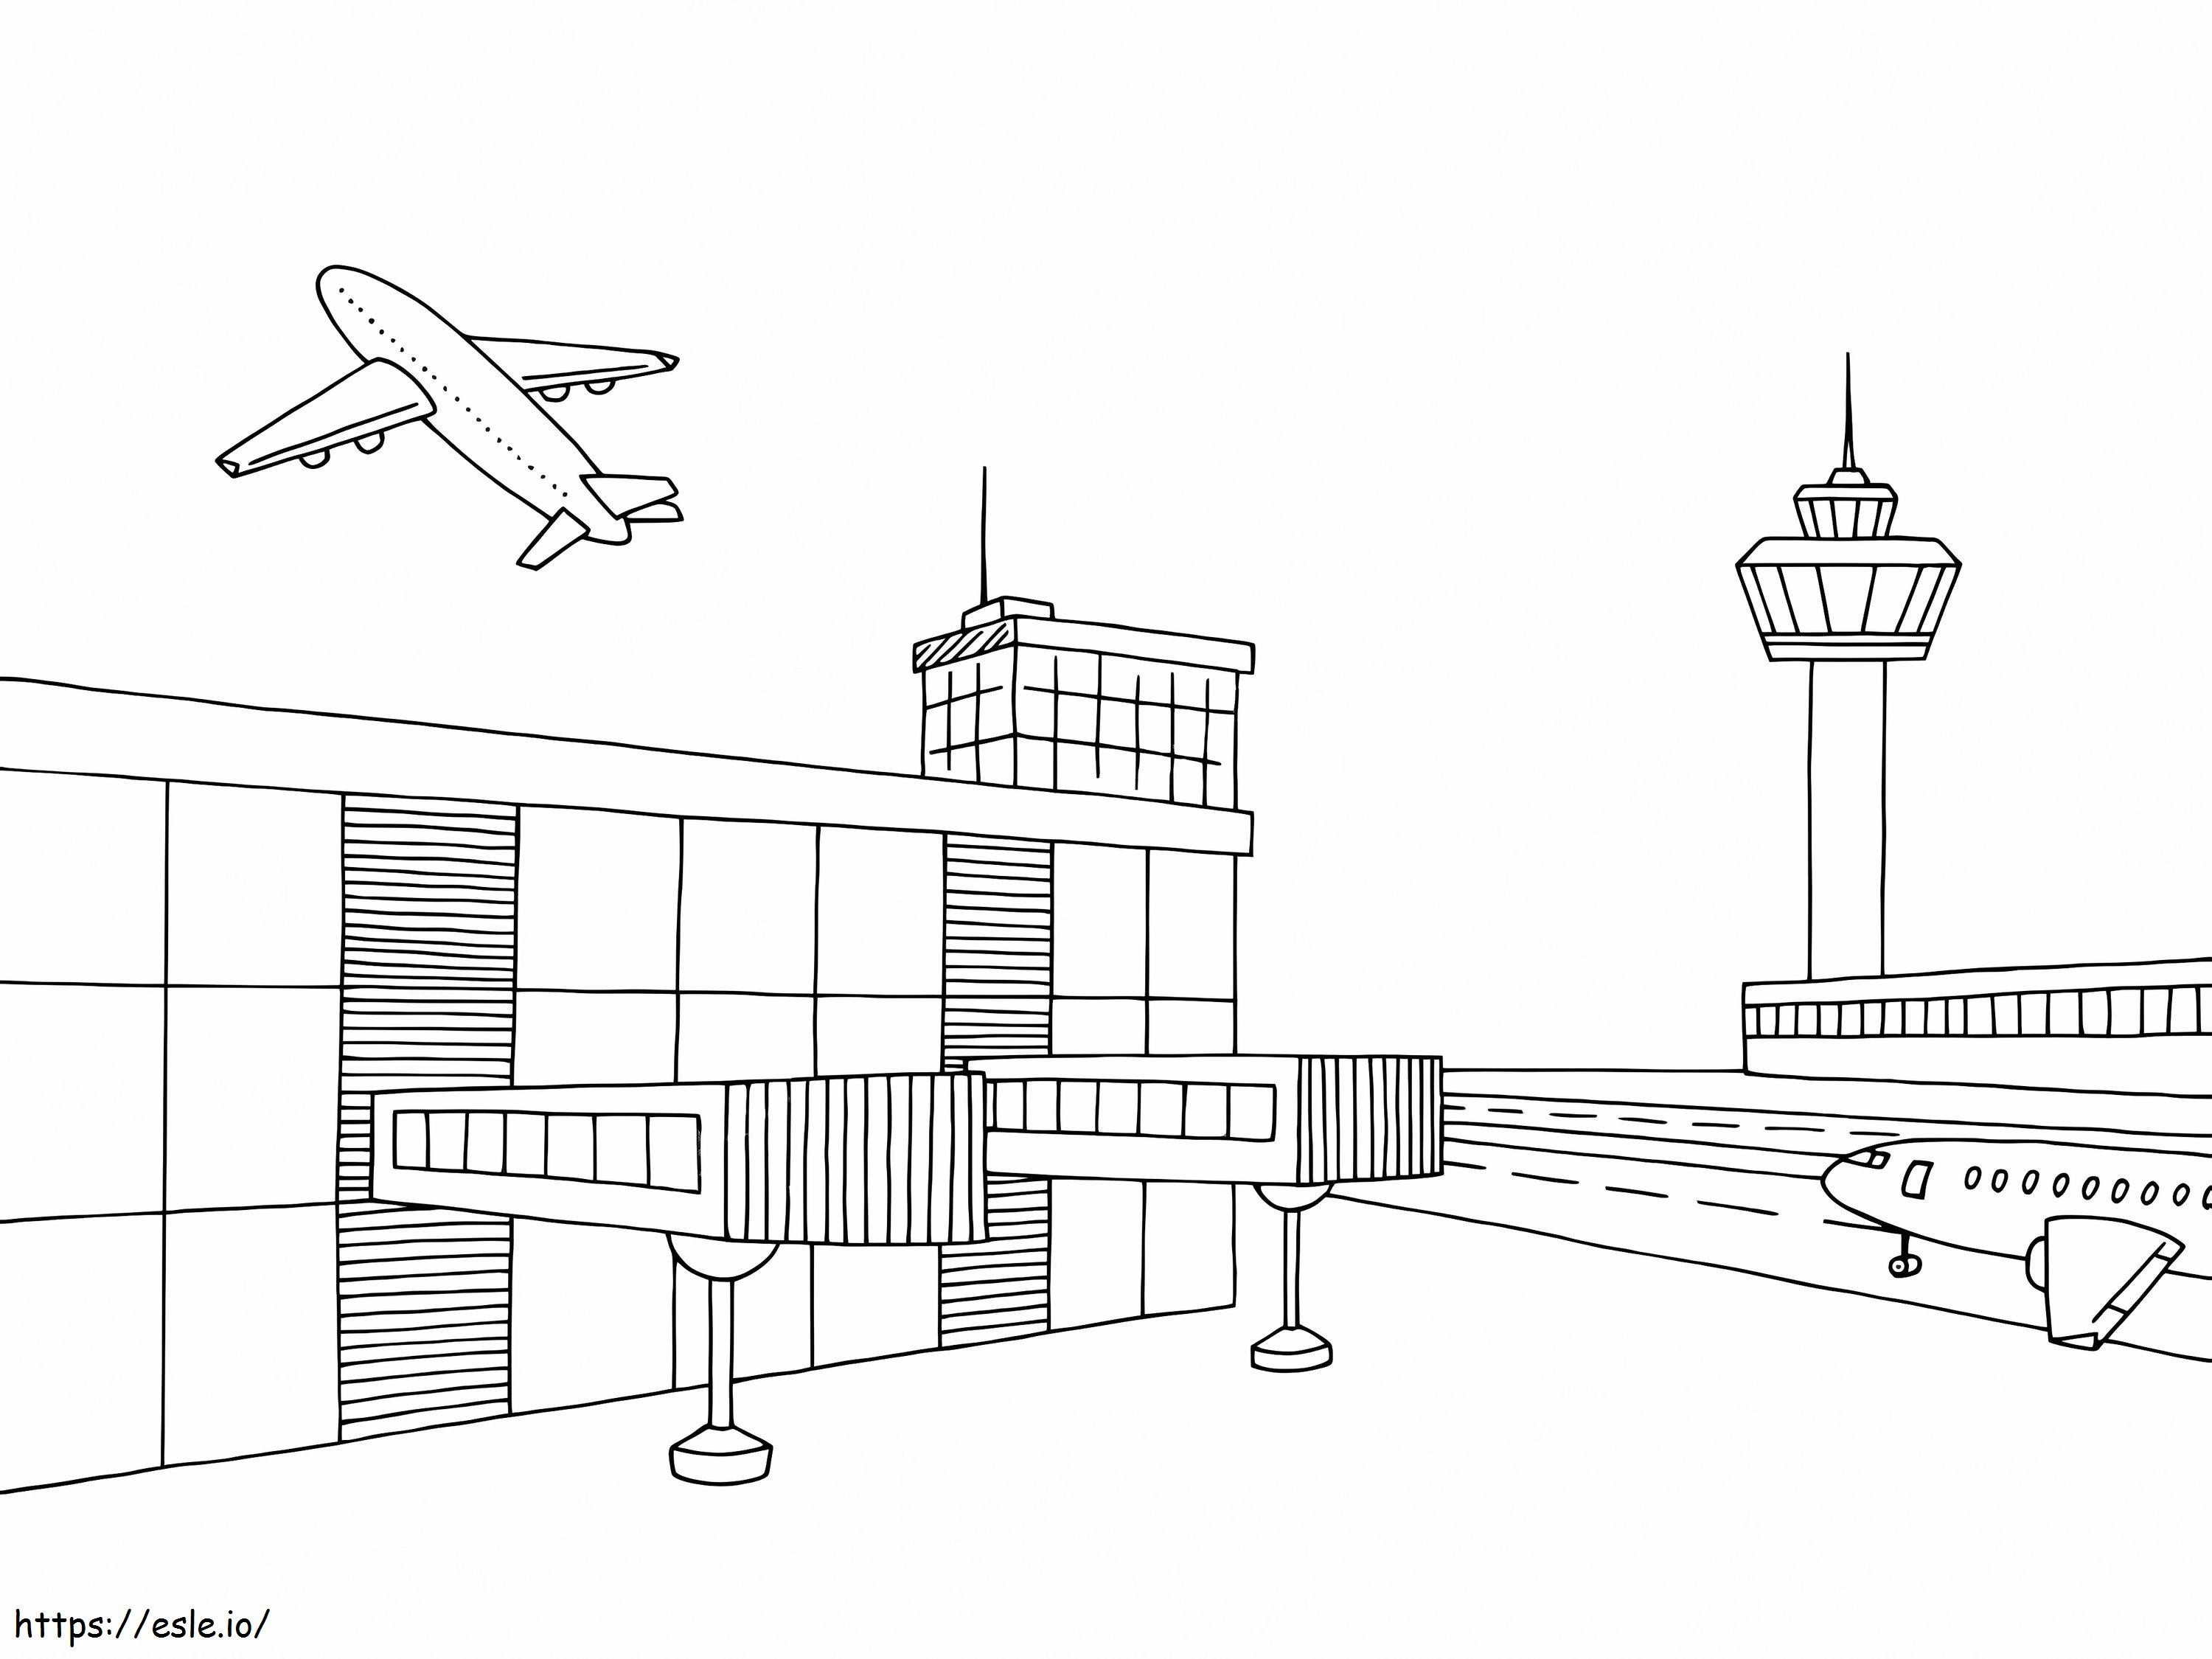 At The Airport coloring page